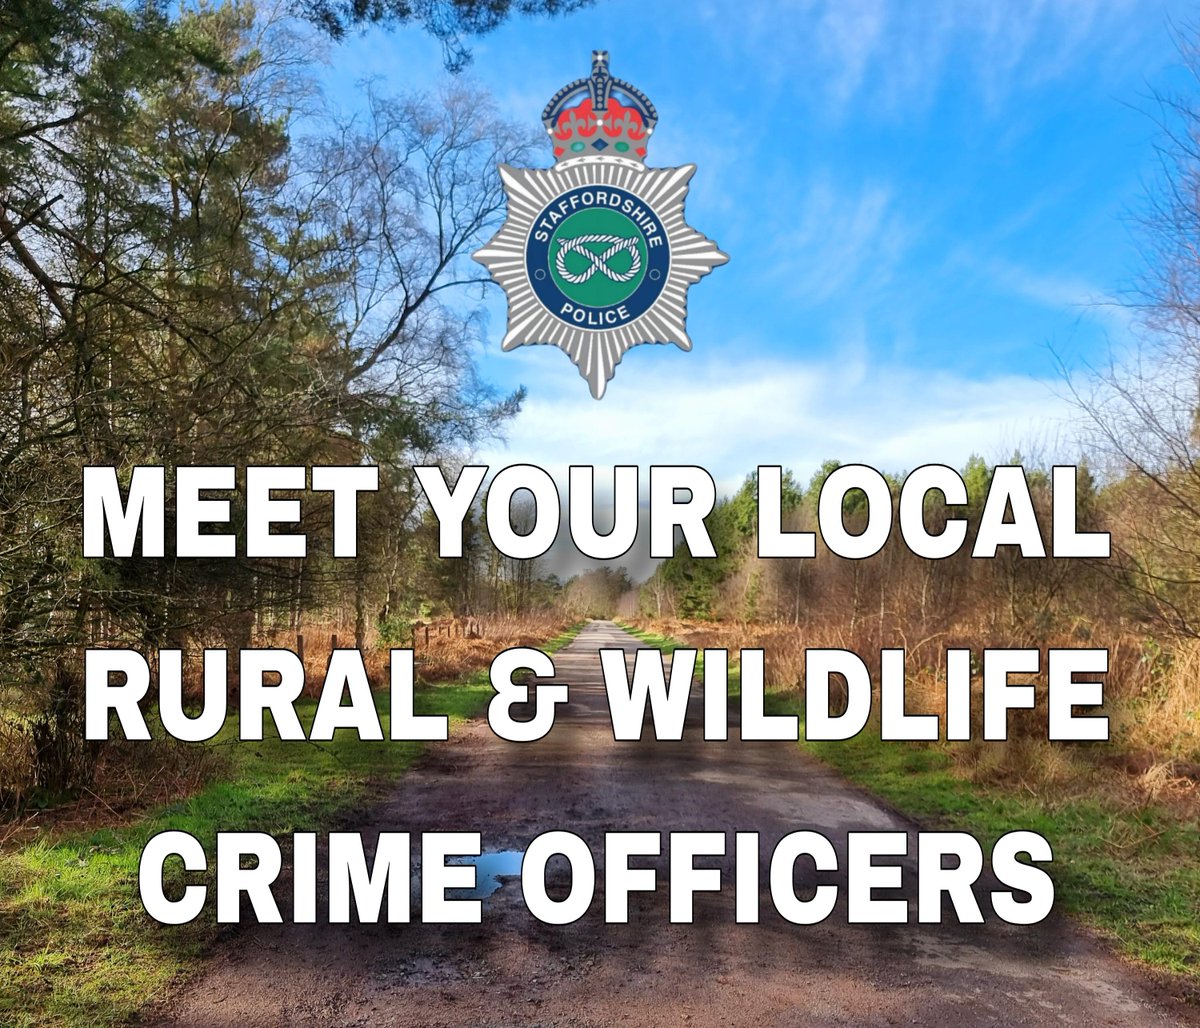 MEET YOUR RWCU OFFICERS; Your local Rural & Wildlife Crime officers will be at Birches Valley in Cannock Chase on Saturday 6th April between 12pm and 3pm. Please do come and say hello! 🦌 👮 #RuralAndWildlife #BirchesValley #CannockChase #Police